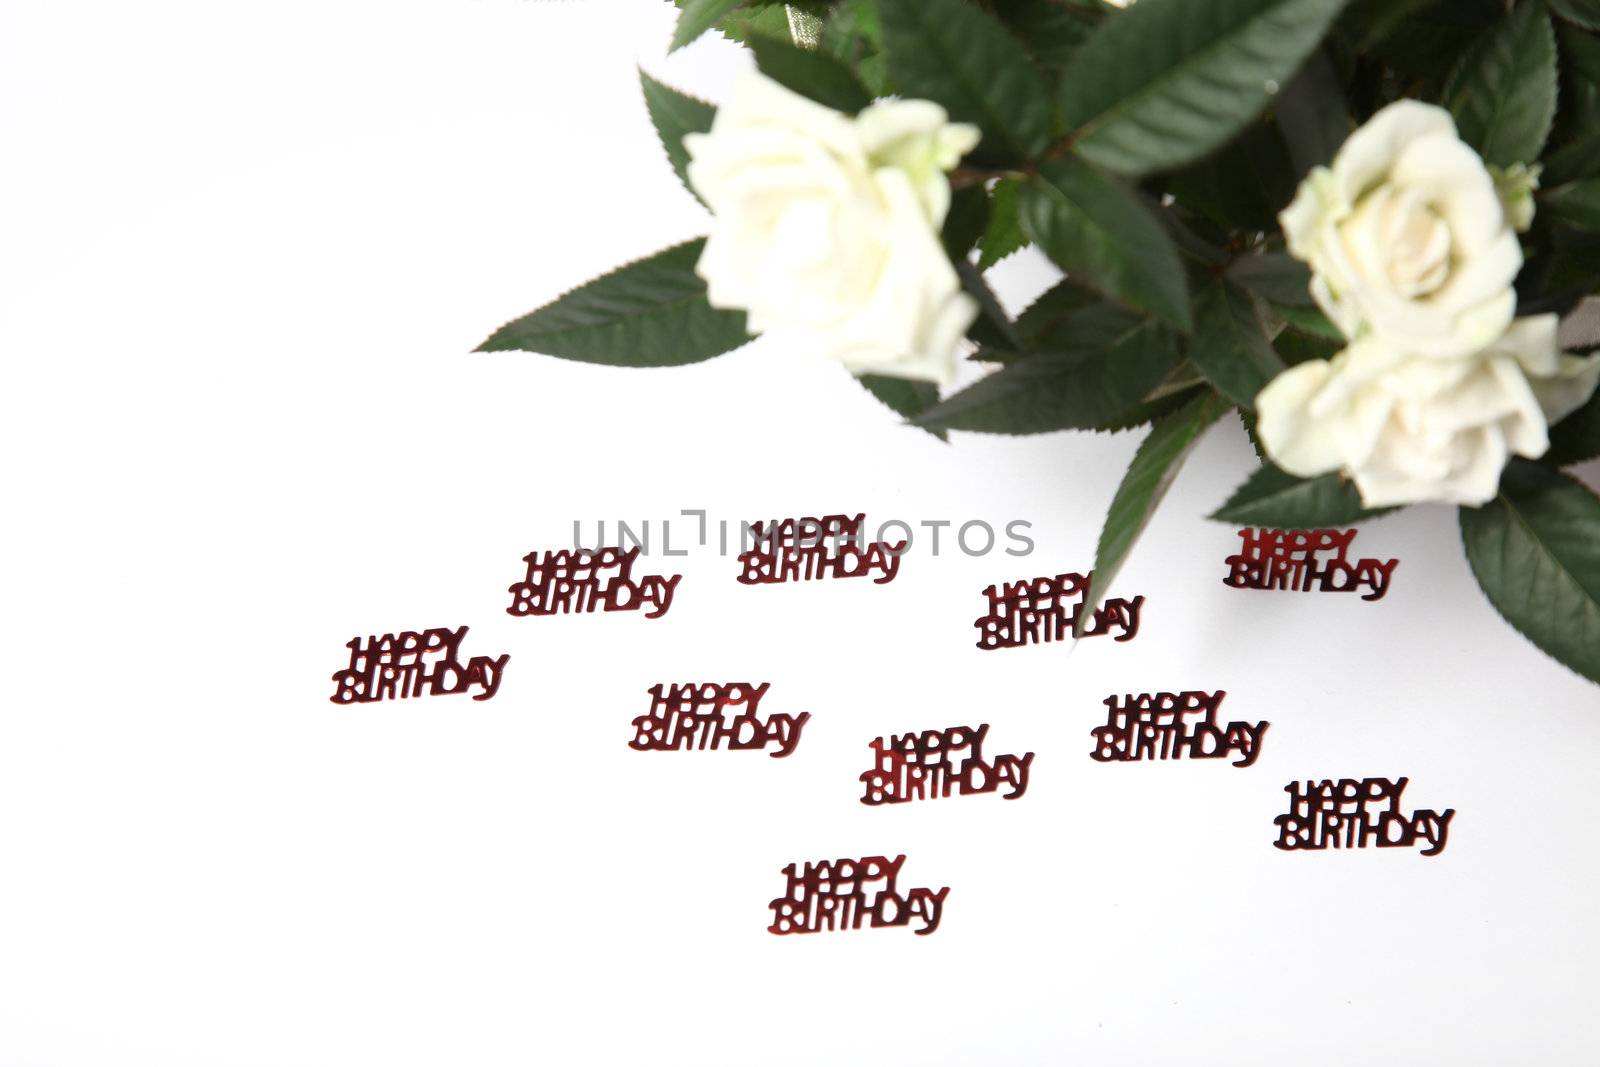 Lettering with "happy birthday" and white roses in the background space for text